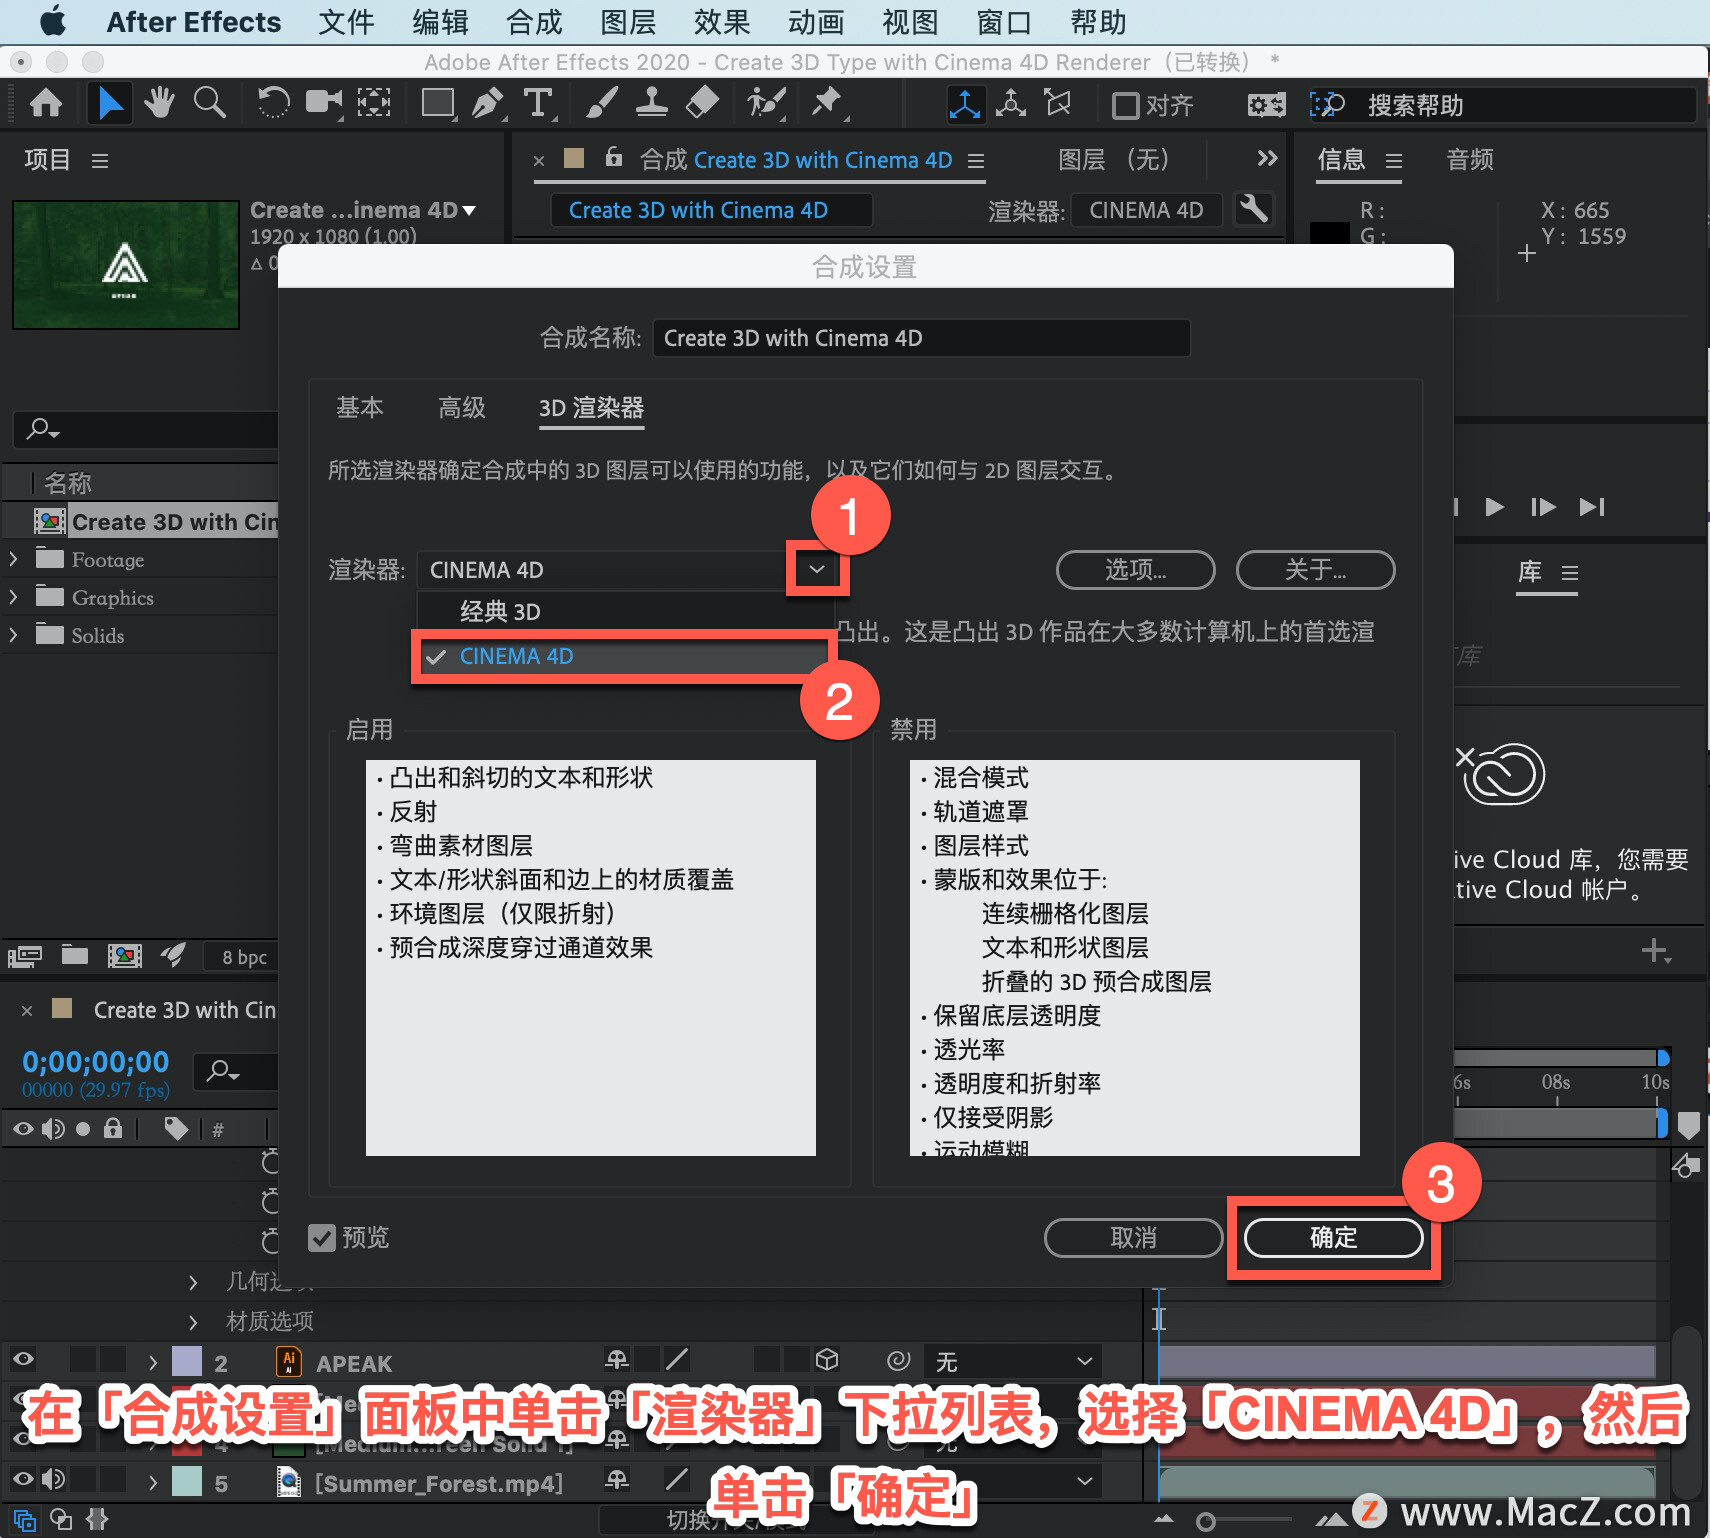 After Effects 教程「57」，如何在 After Effects 的形状图层中挤出真正的 3D 数据？